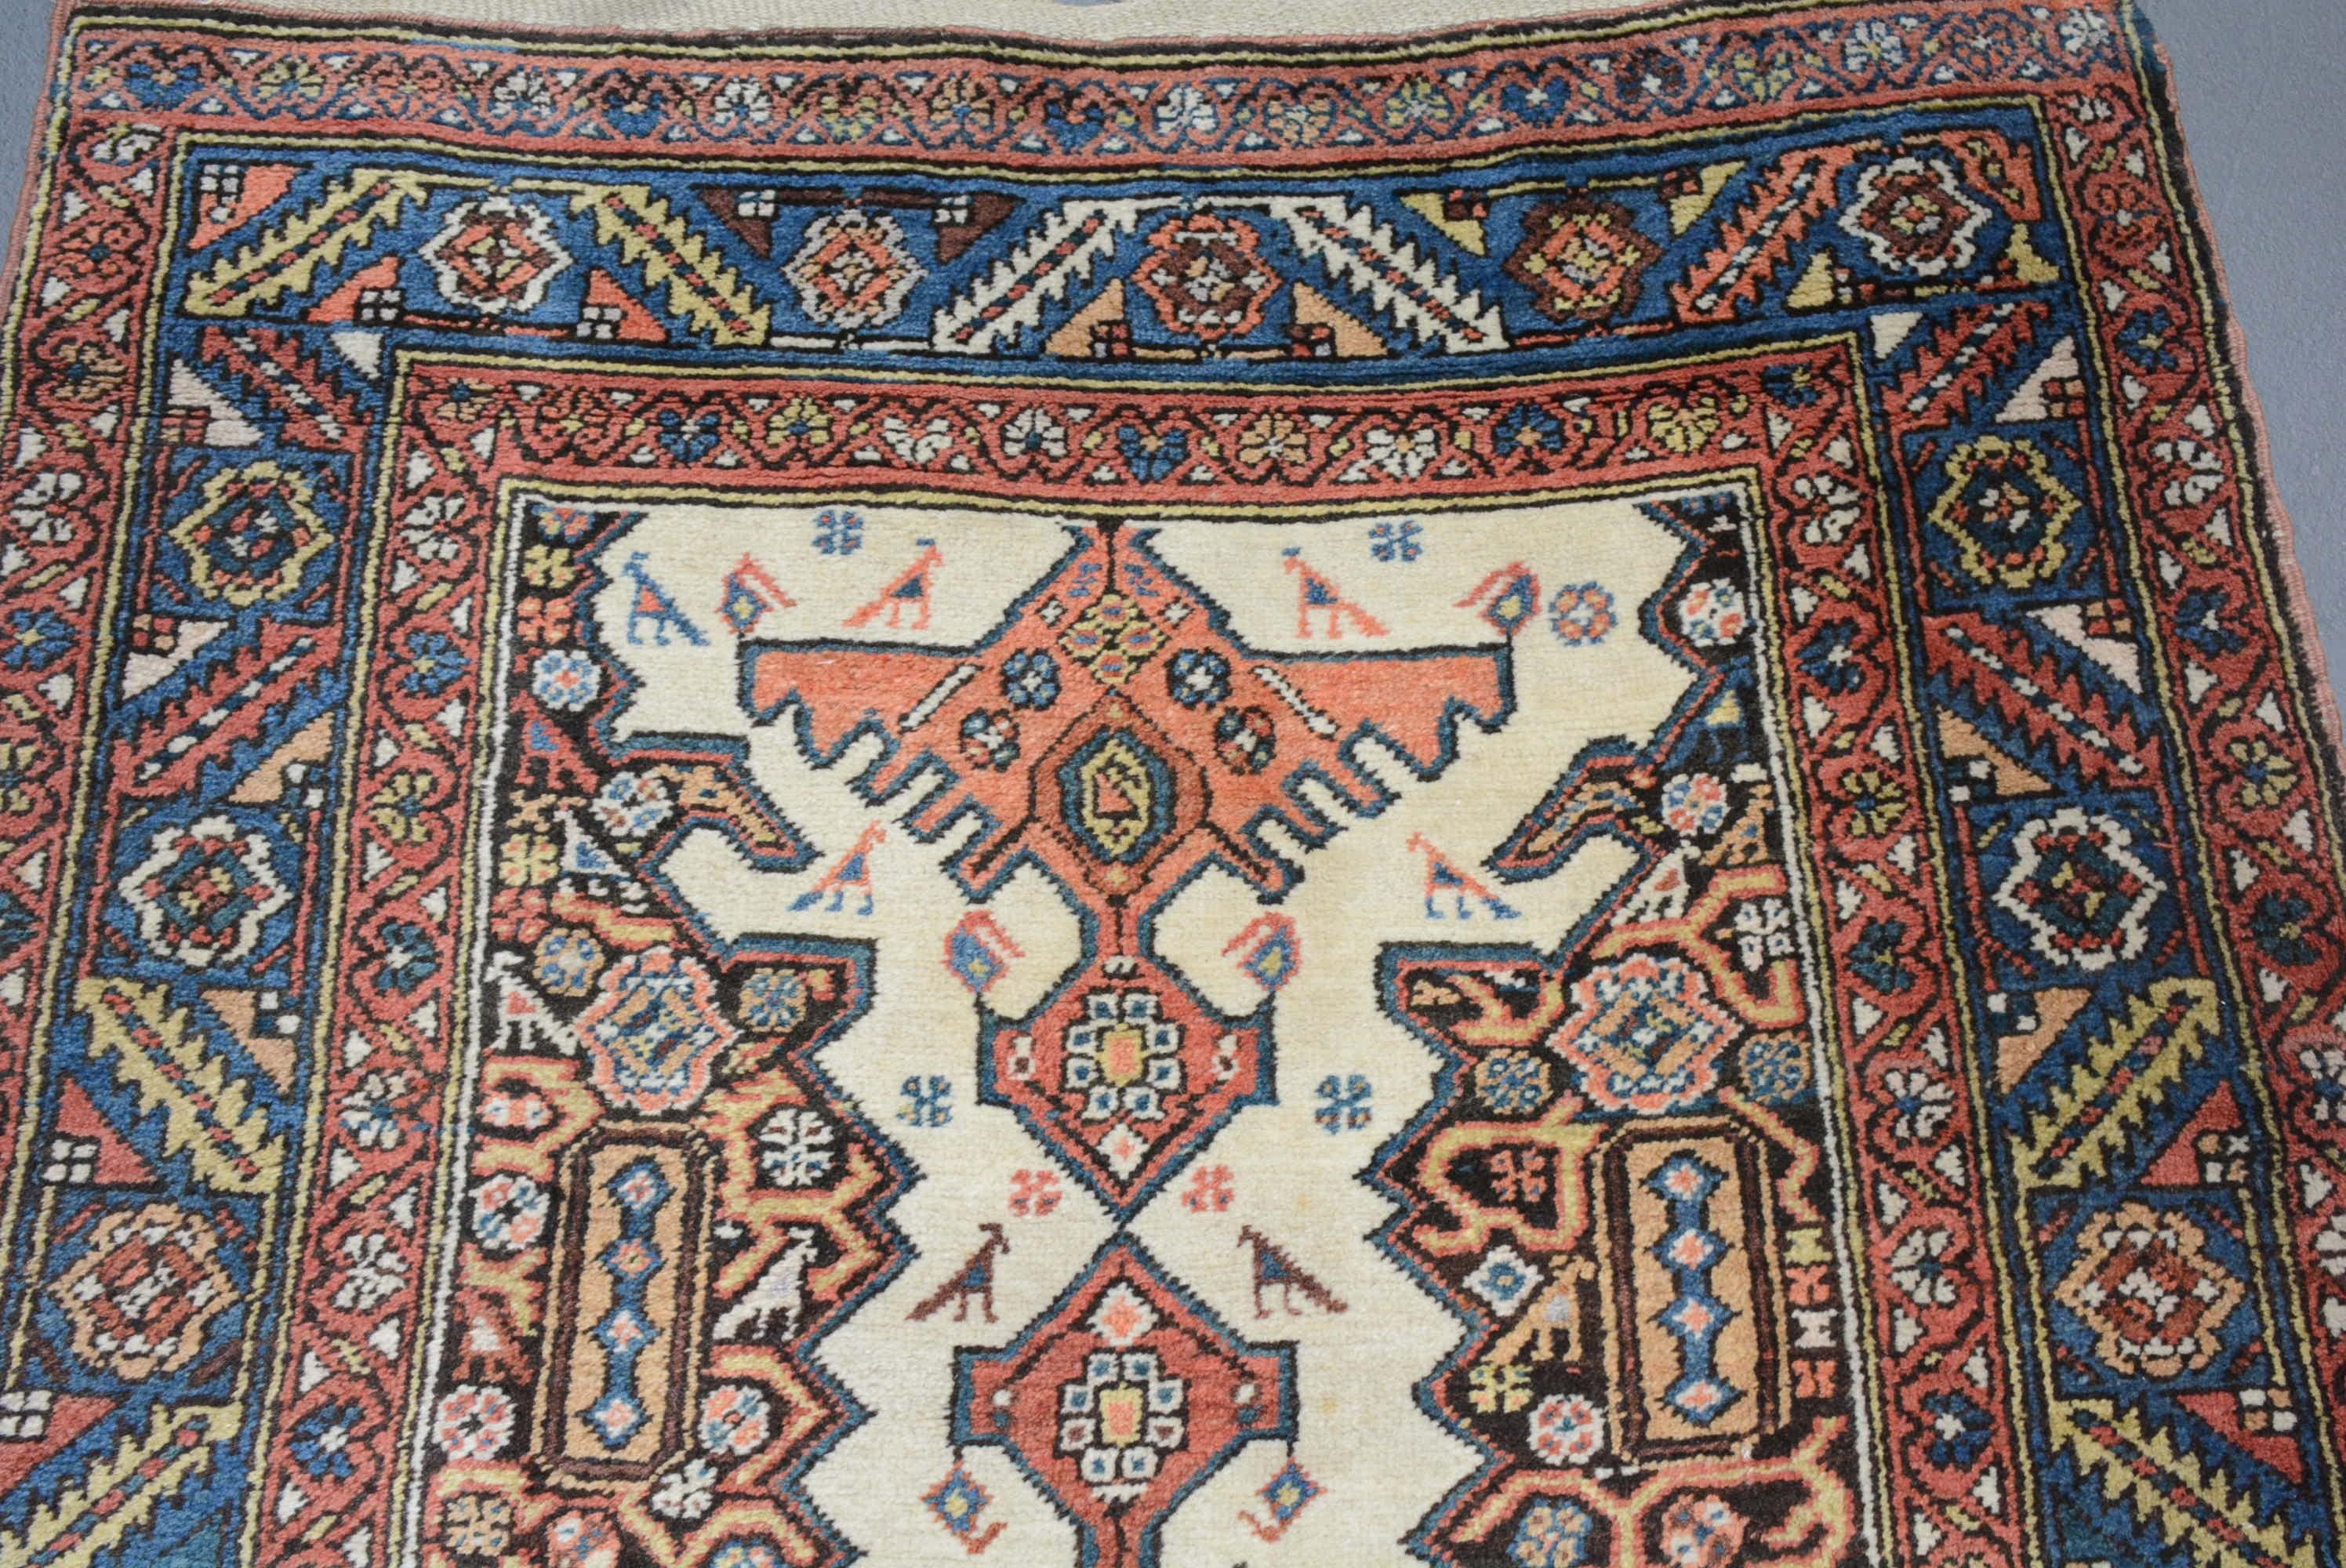 The town of Bakshaish is located in the mountainous Heriz region of Northwest Persia, and is generally accepted to be the oldest weaving village in this district. It is noted for producing carpets that display bold abstract interpretations of the